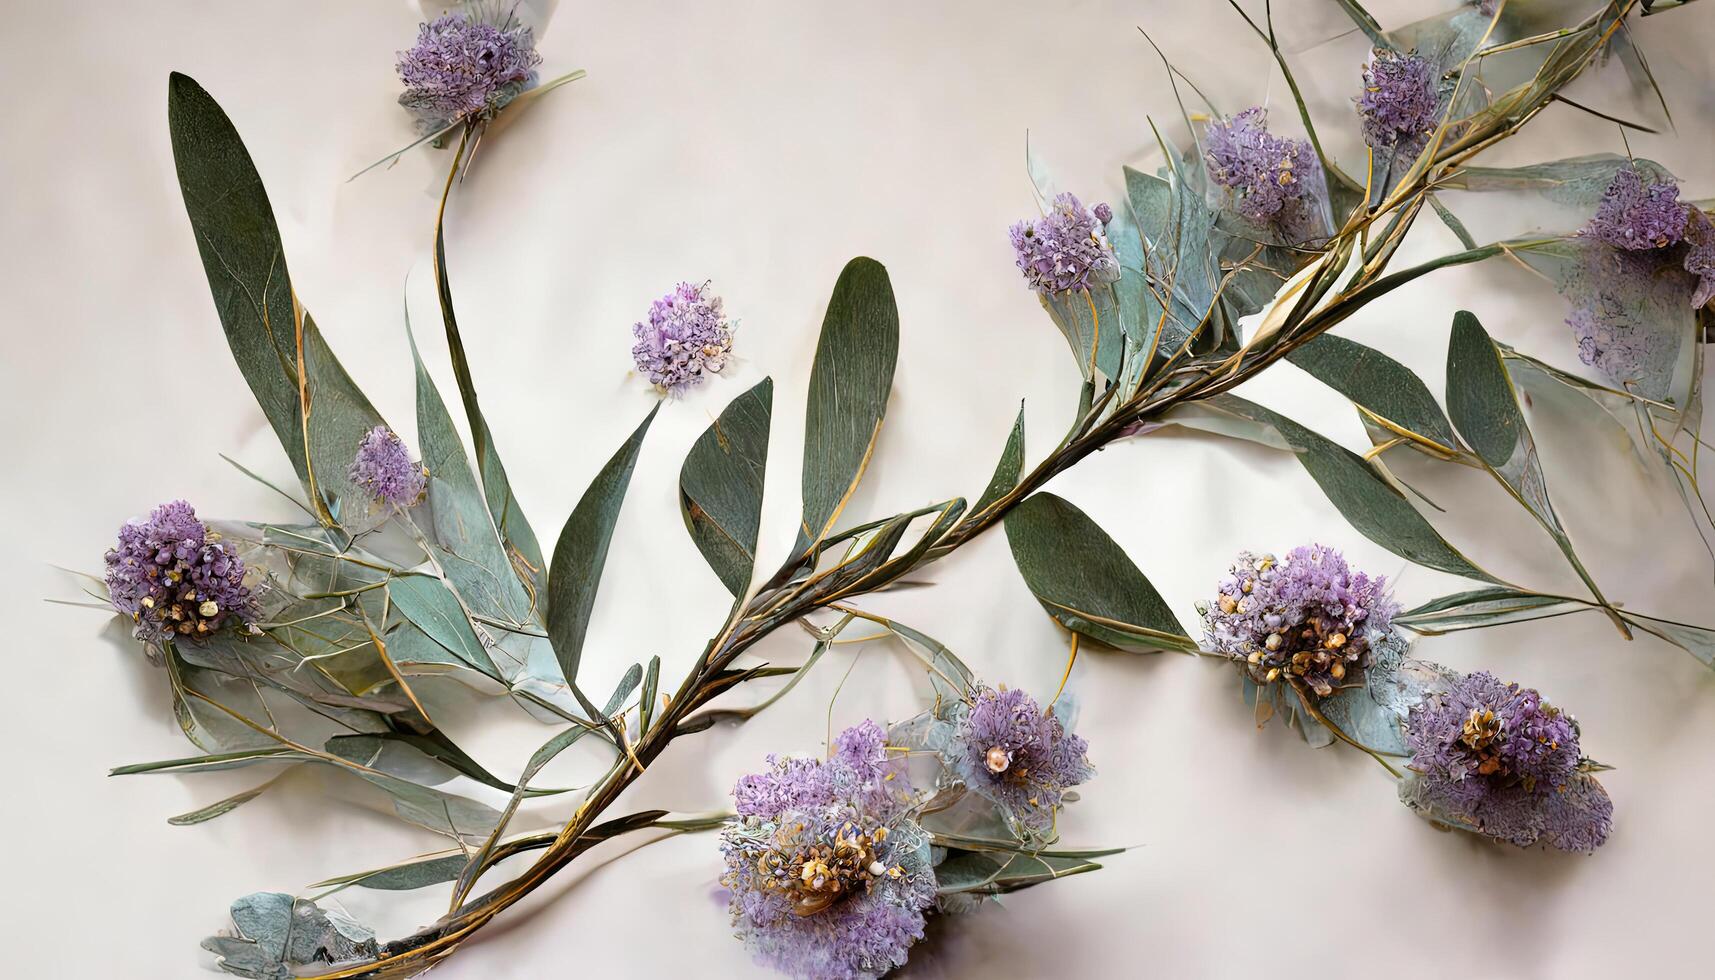 Lavender eucalyptus leaves, sage, and olive branches make up this flower frame from a digital watercolor painting that is isolated on white. photo